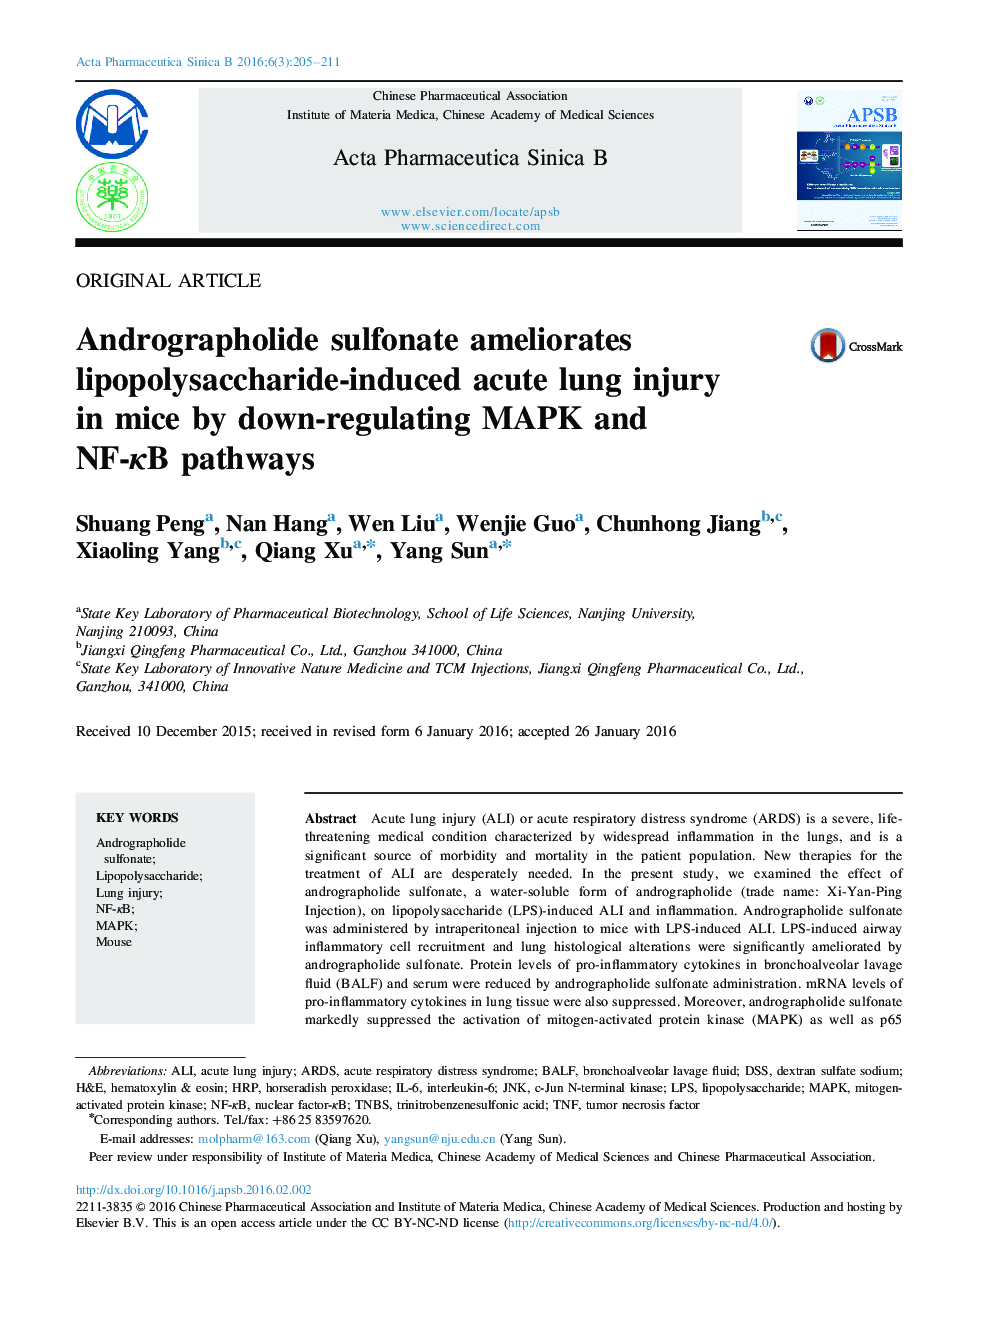 Andrographolide sulfonate ameliorates lipopolysaccharide-induced acute lung injury in mice by down-regulating MAPK and NF-κB pathways 